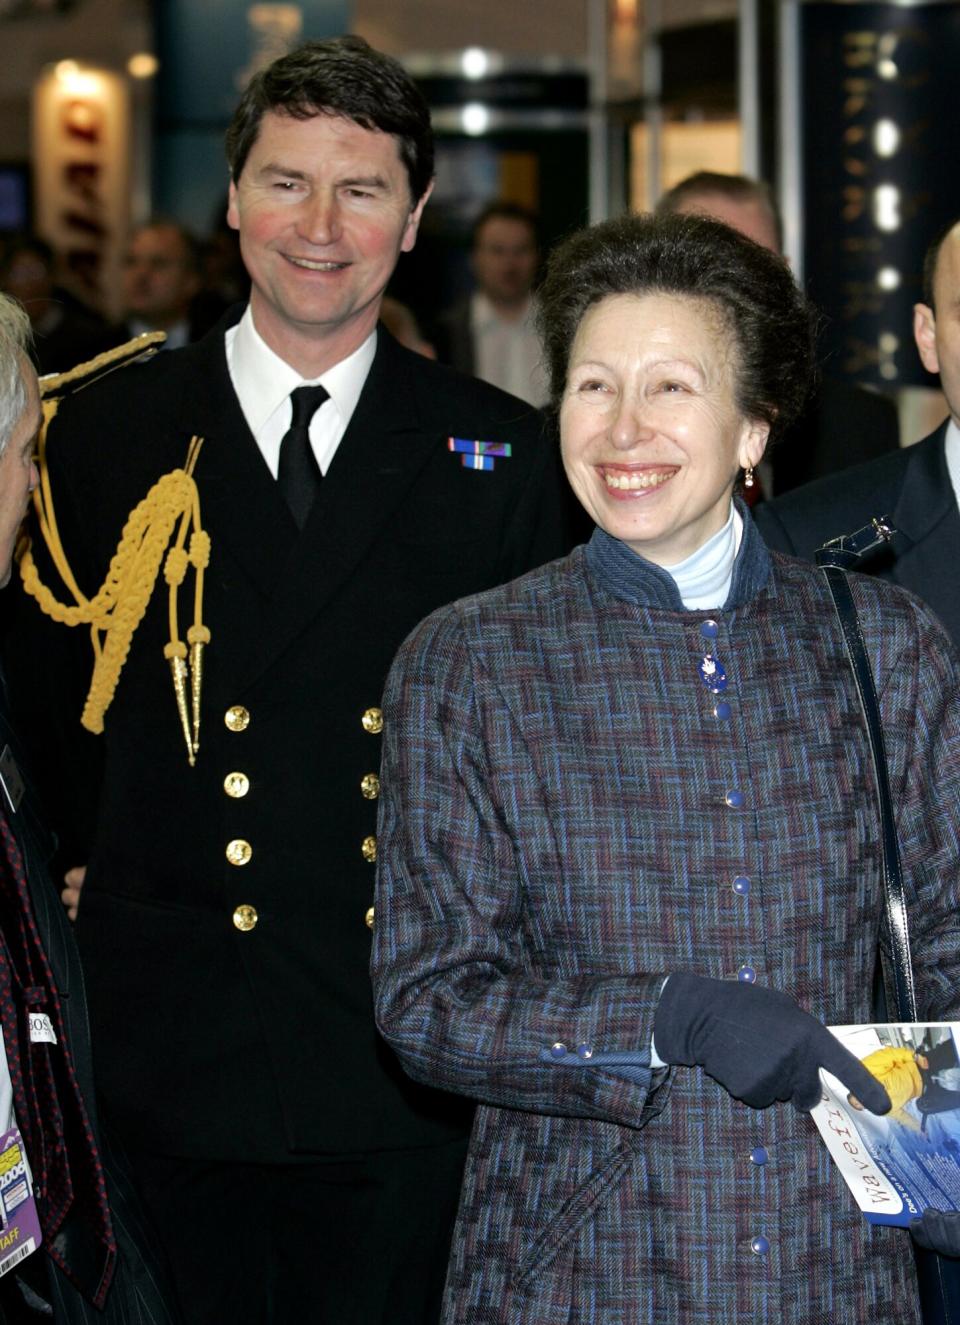 Princess Anne, As President Of The Royal Yachting Association, Attends The London Boat Show At Excel, Accompanied By Husband Tim Laurence